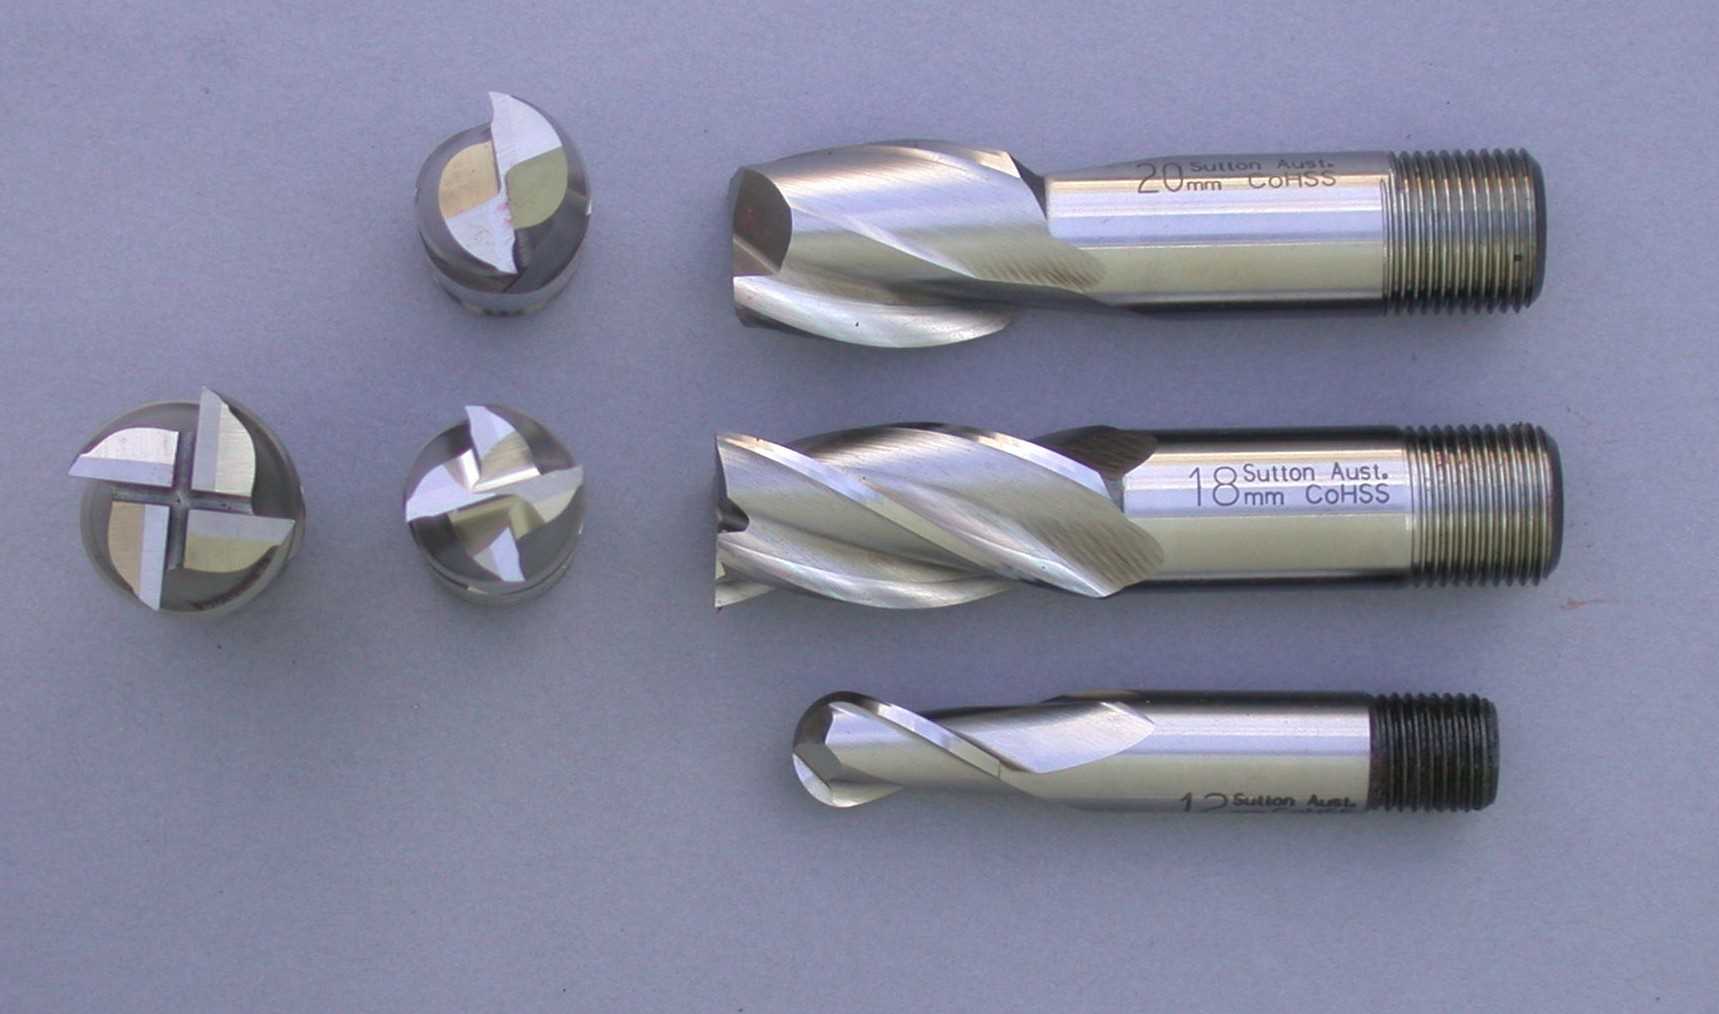 Milling Cutters 